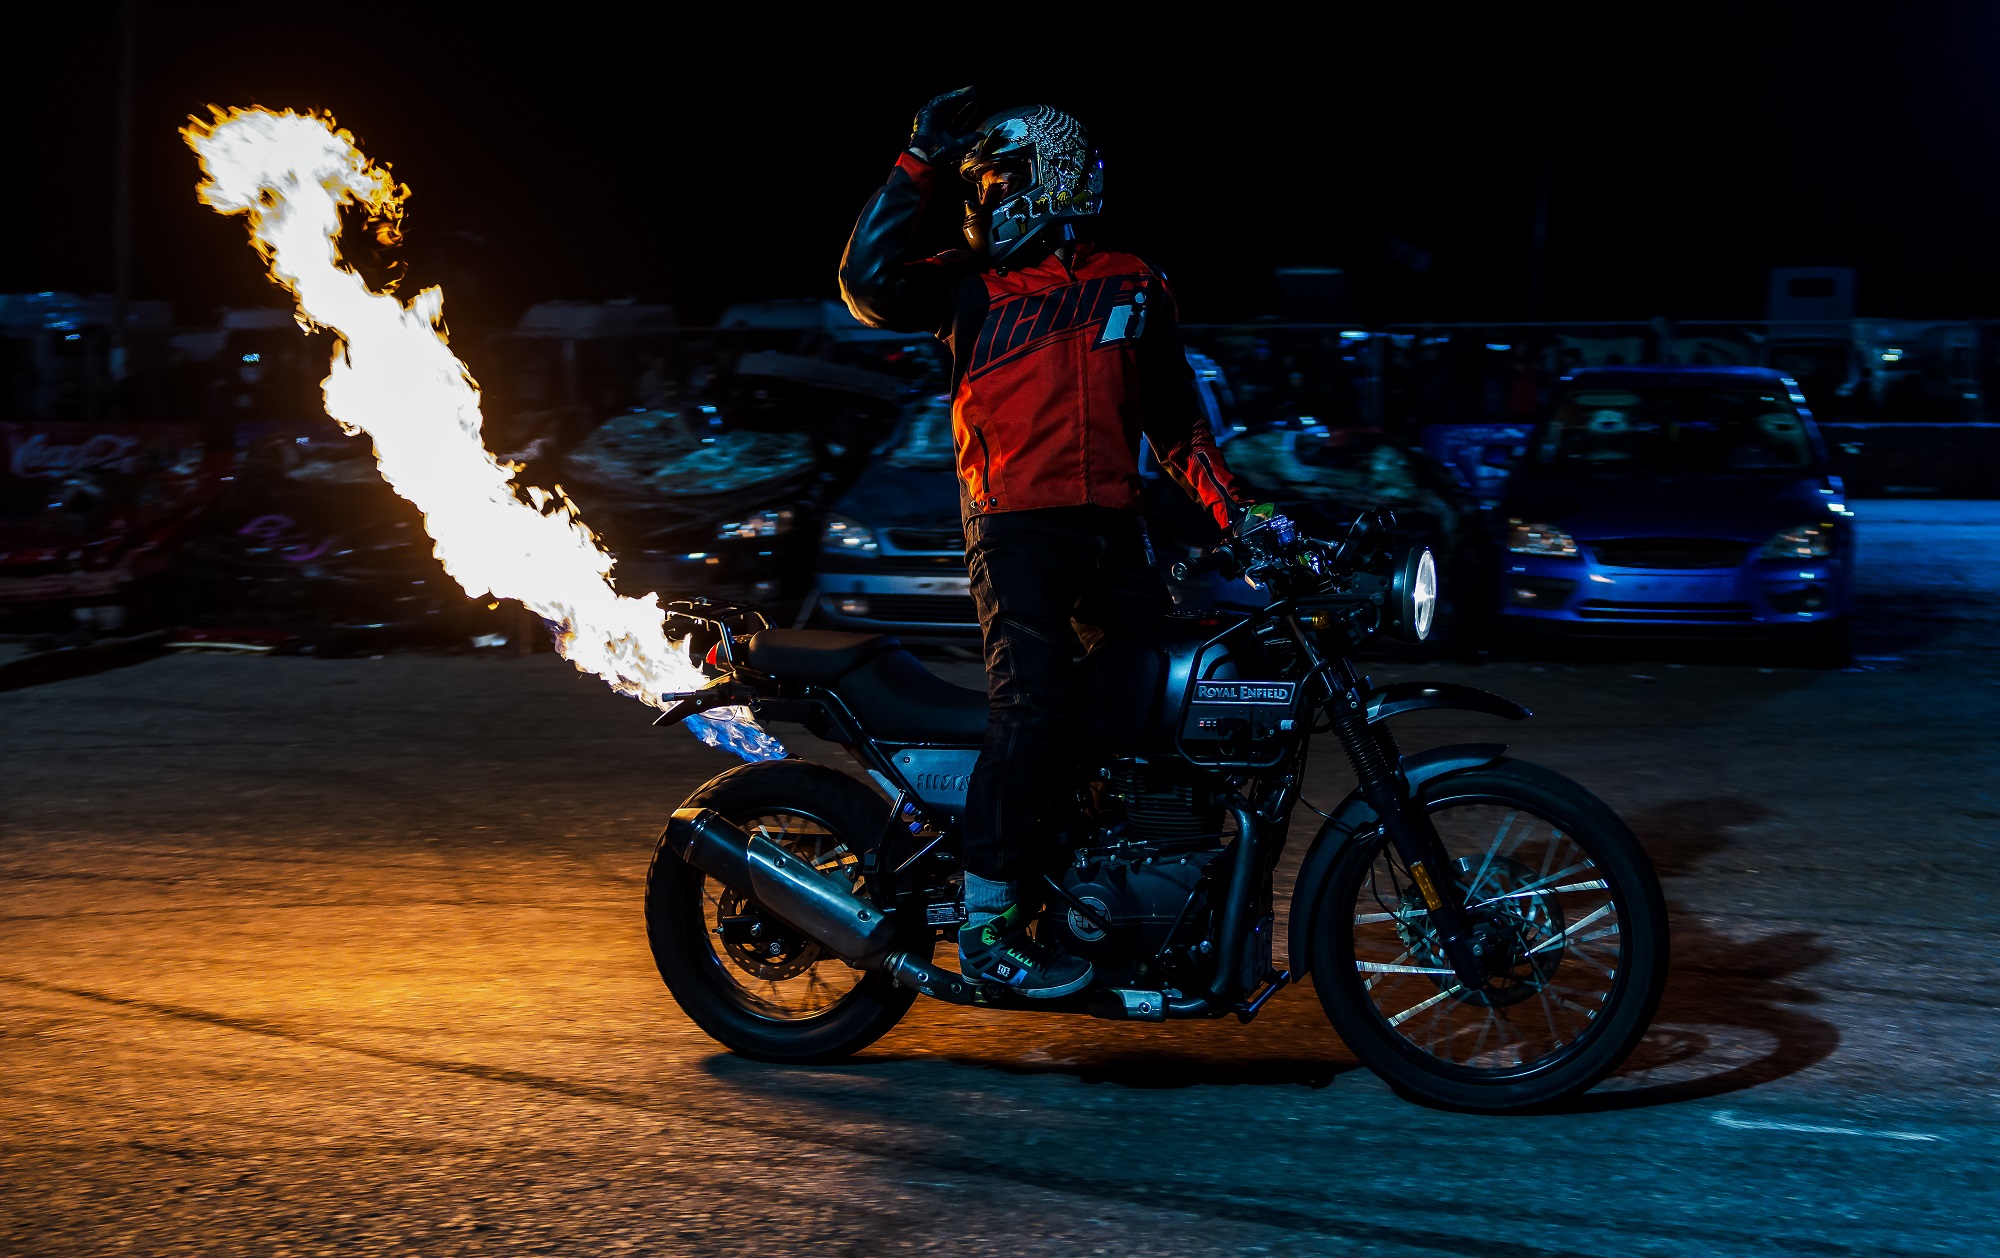 Stunt legend Lee Bowers switches to Royal Enfield power... | Visordown